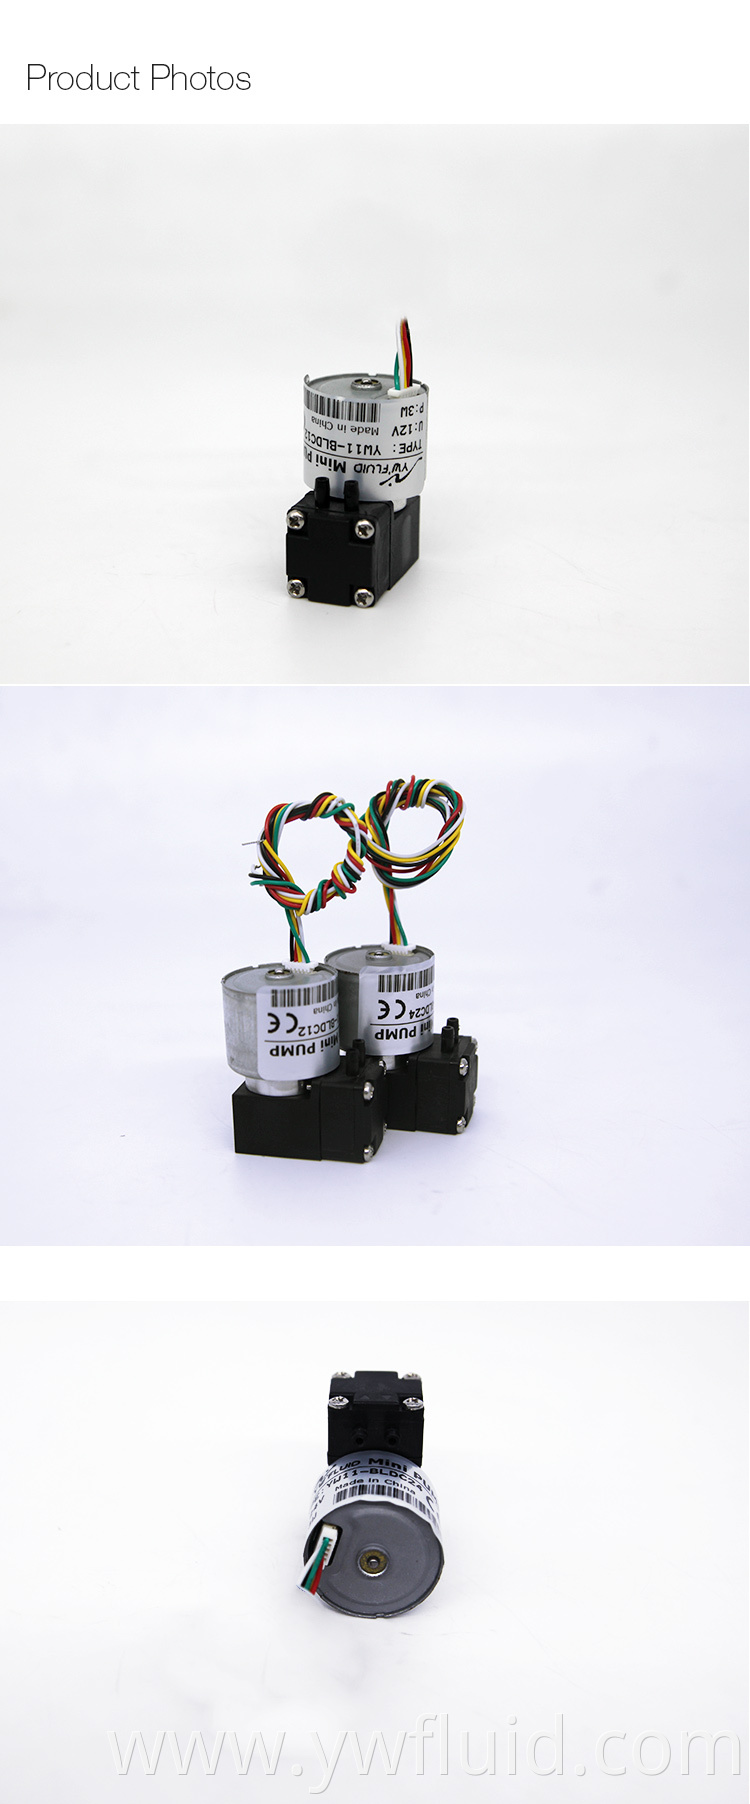 YWfluid 12v Micro Mini Air Pumps with BLDC motor Flow rate 180ml/min Used for gas suction vacuum generation